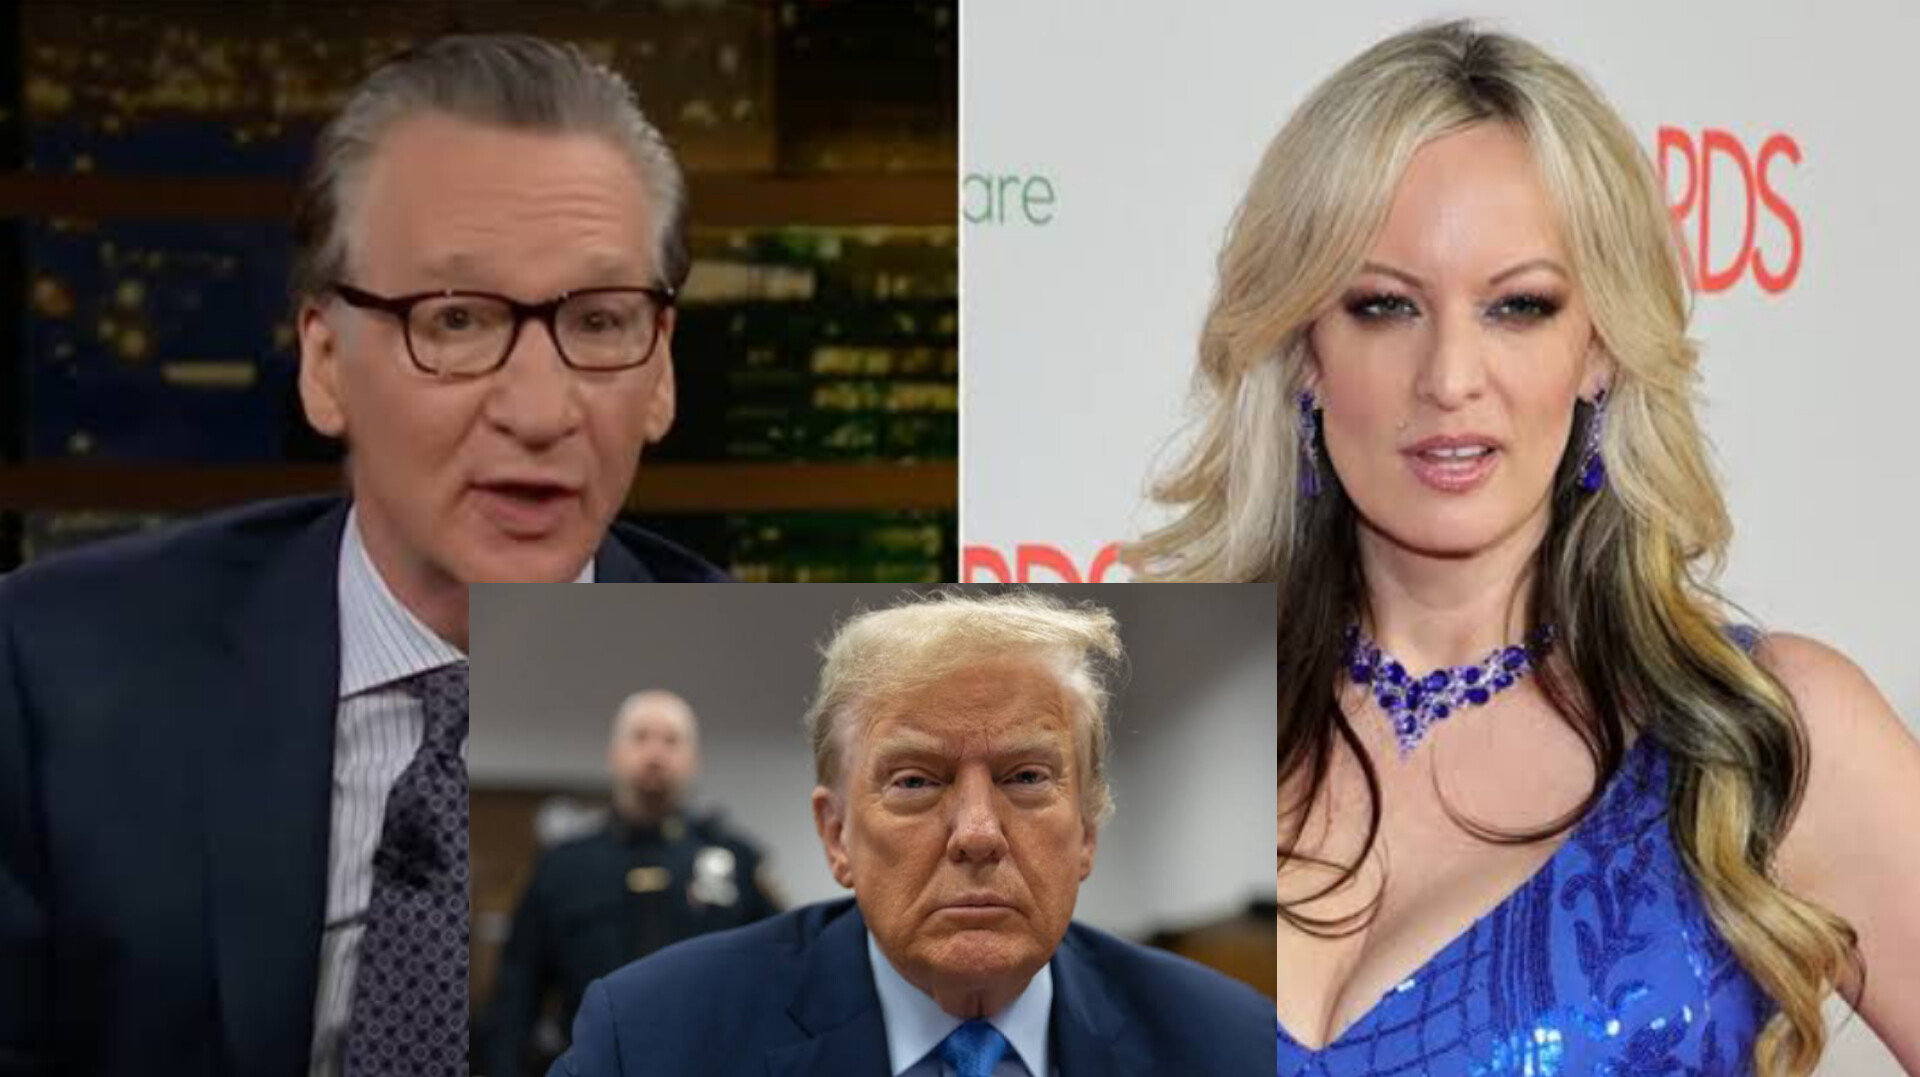 Bill Maher drops 2018 interview where pornstar Stormy Daniels laughed off suggestions Trump coerced her into having sex during their alleged hook-up